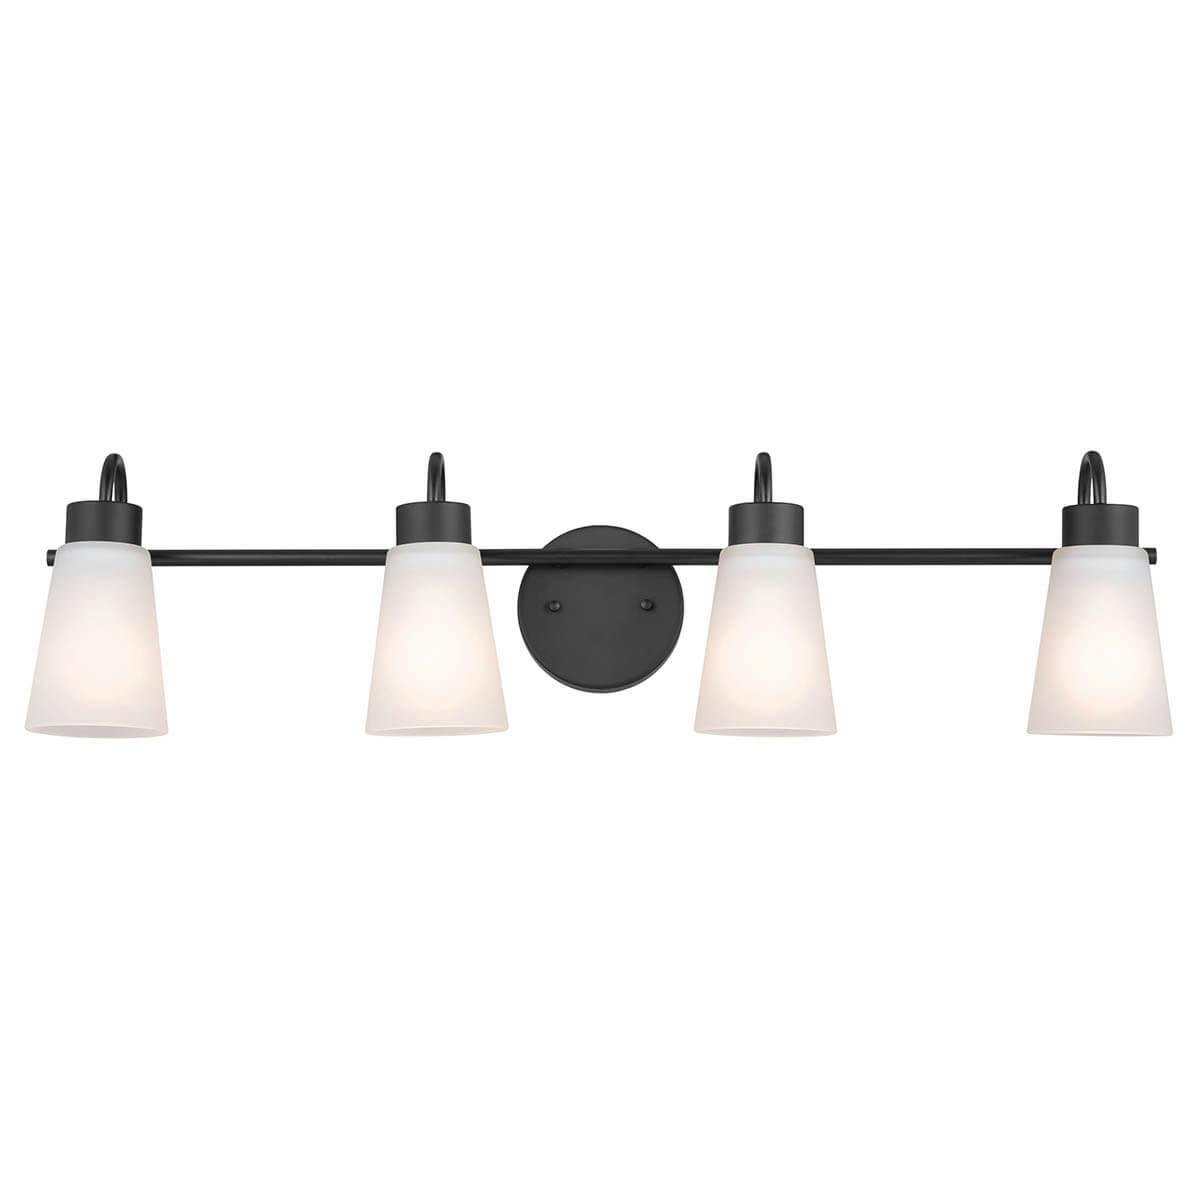 Front view of the Erma 28" 4 Light Vanity Light Black on a white background